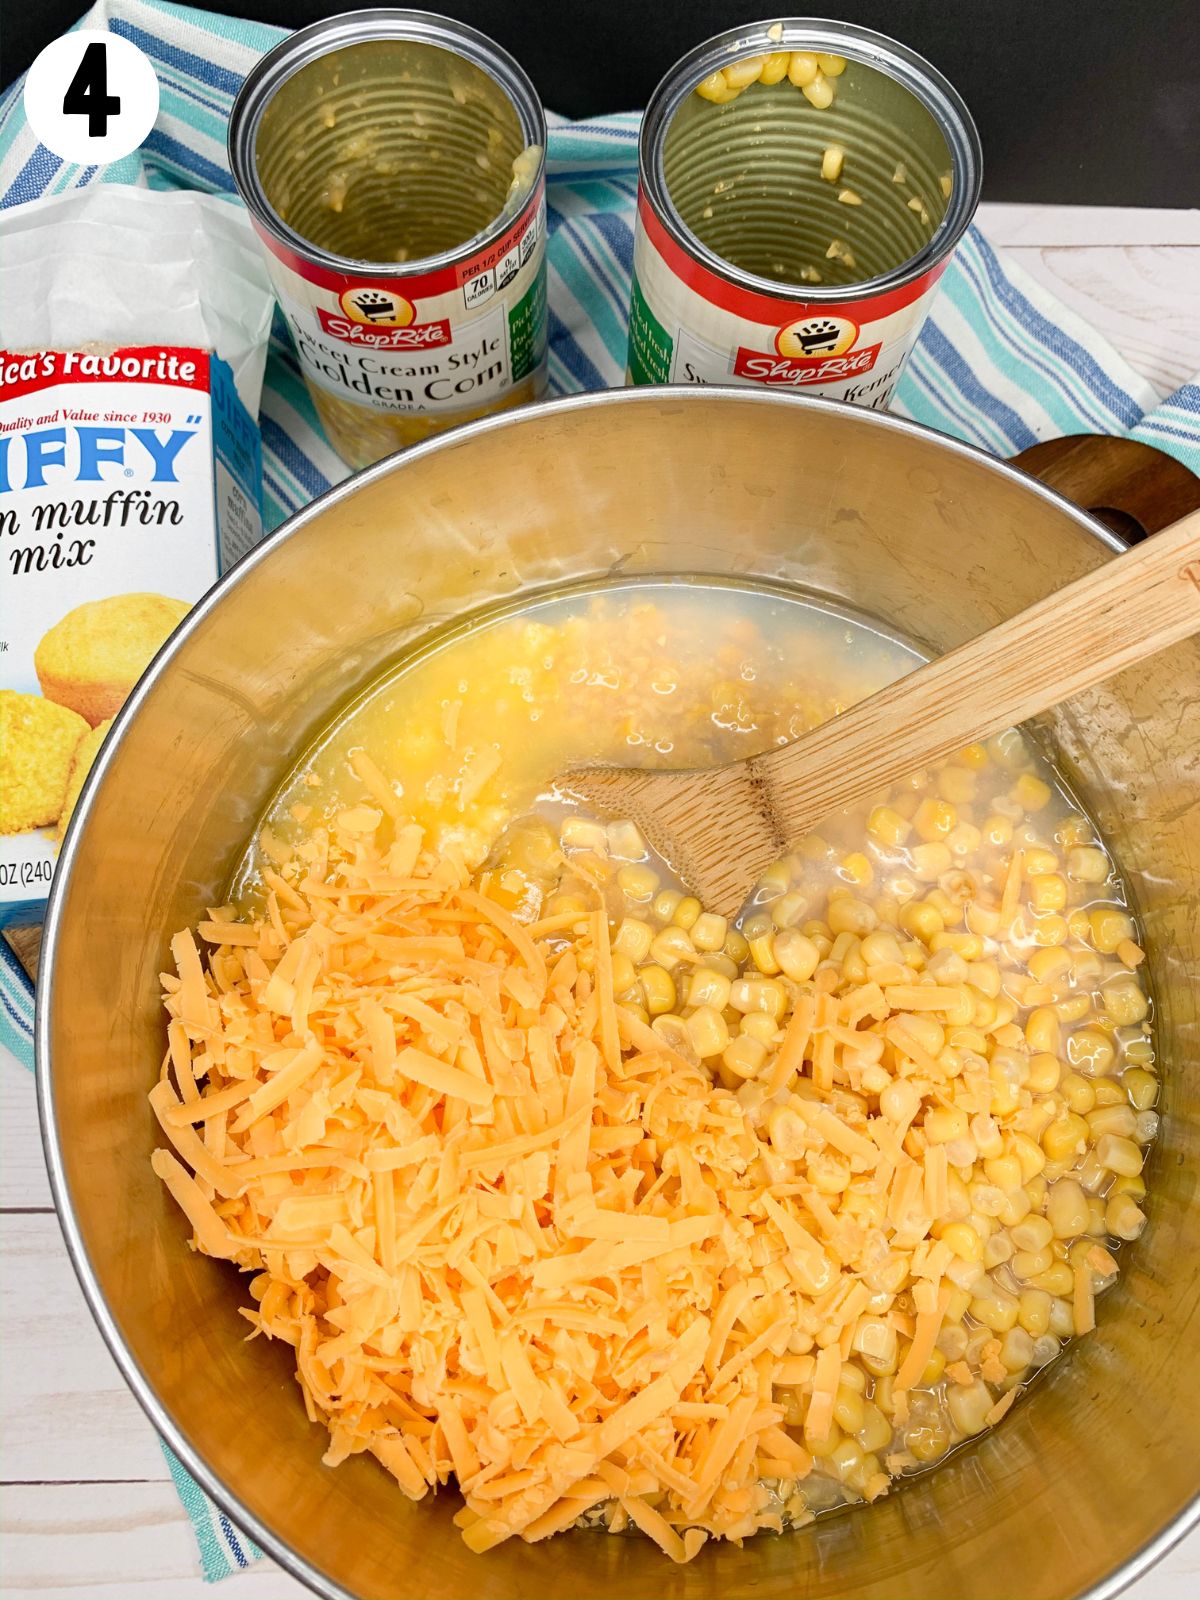 Add cheddar cheese to muffin mix and corn.